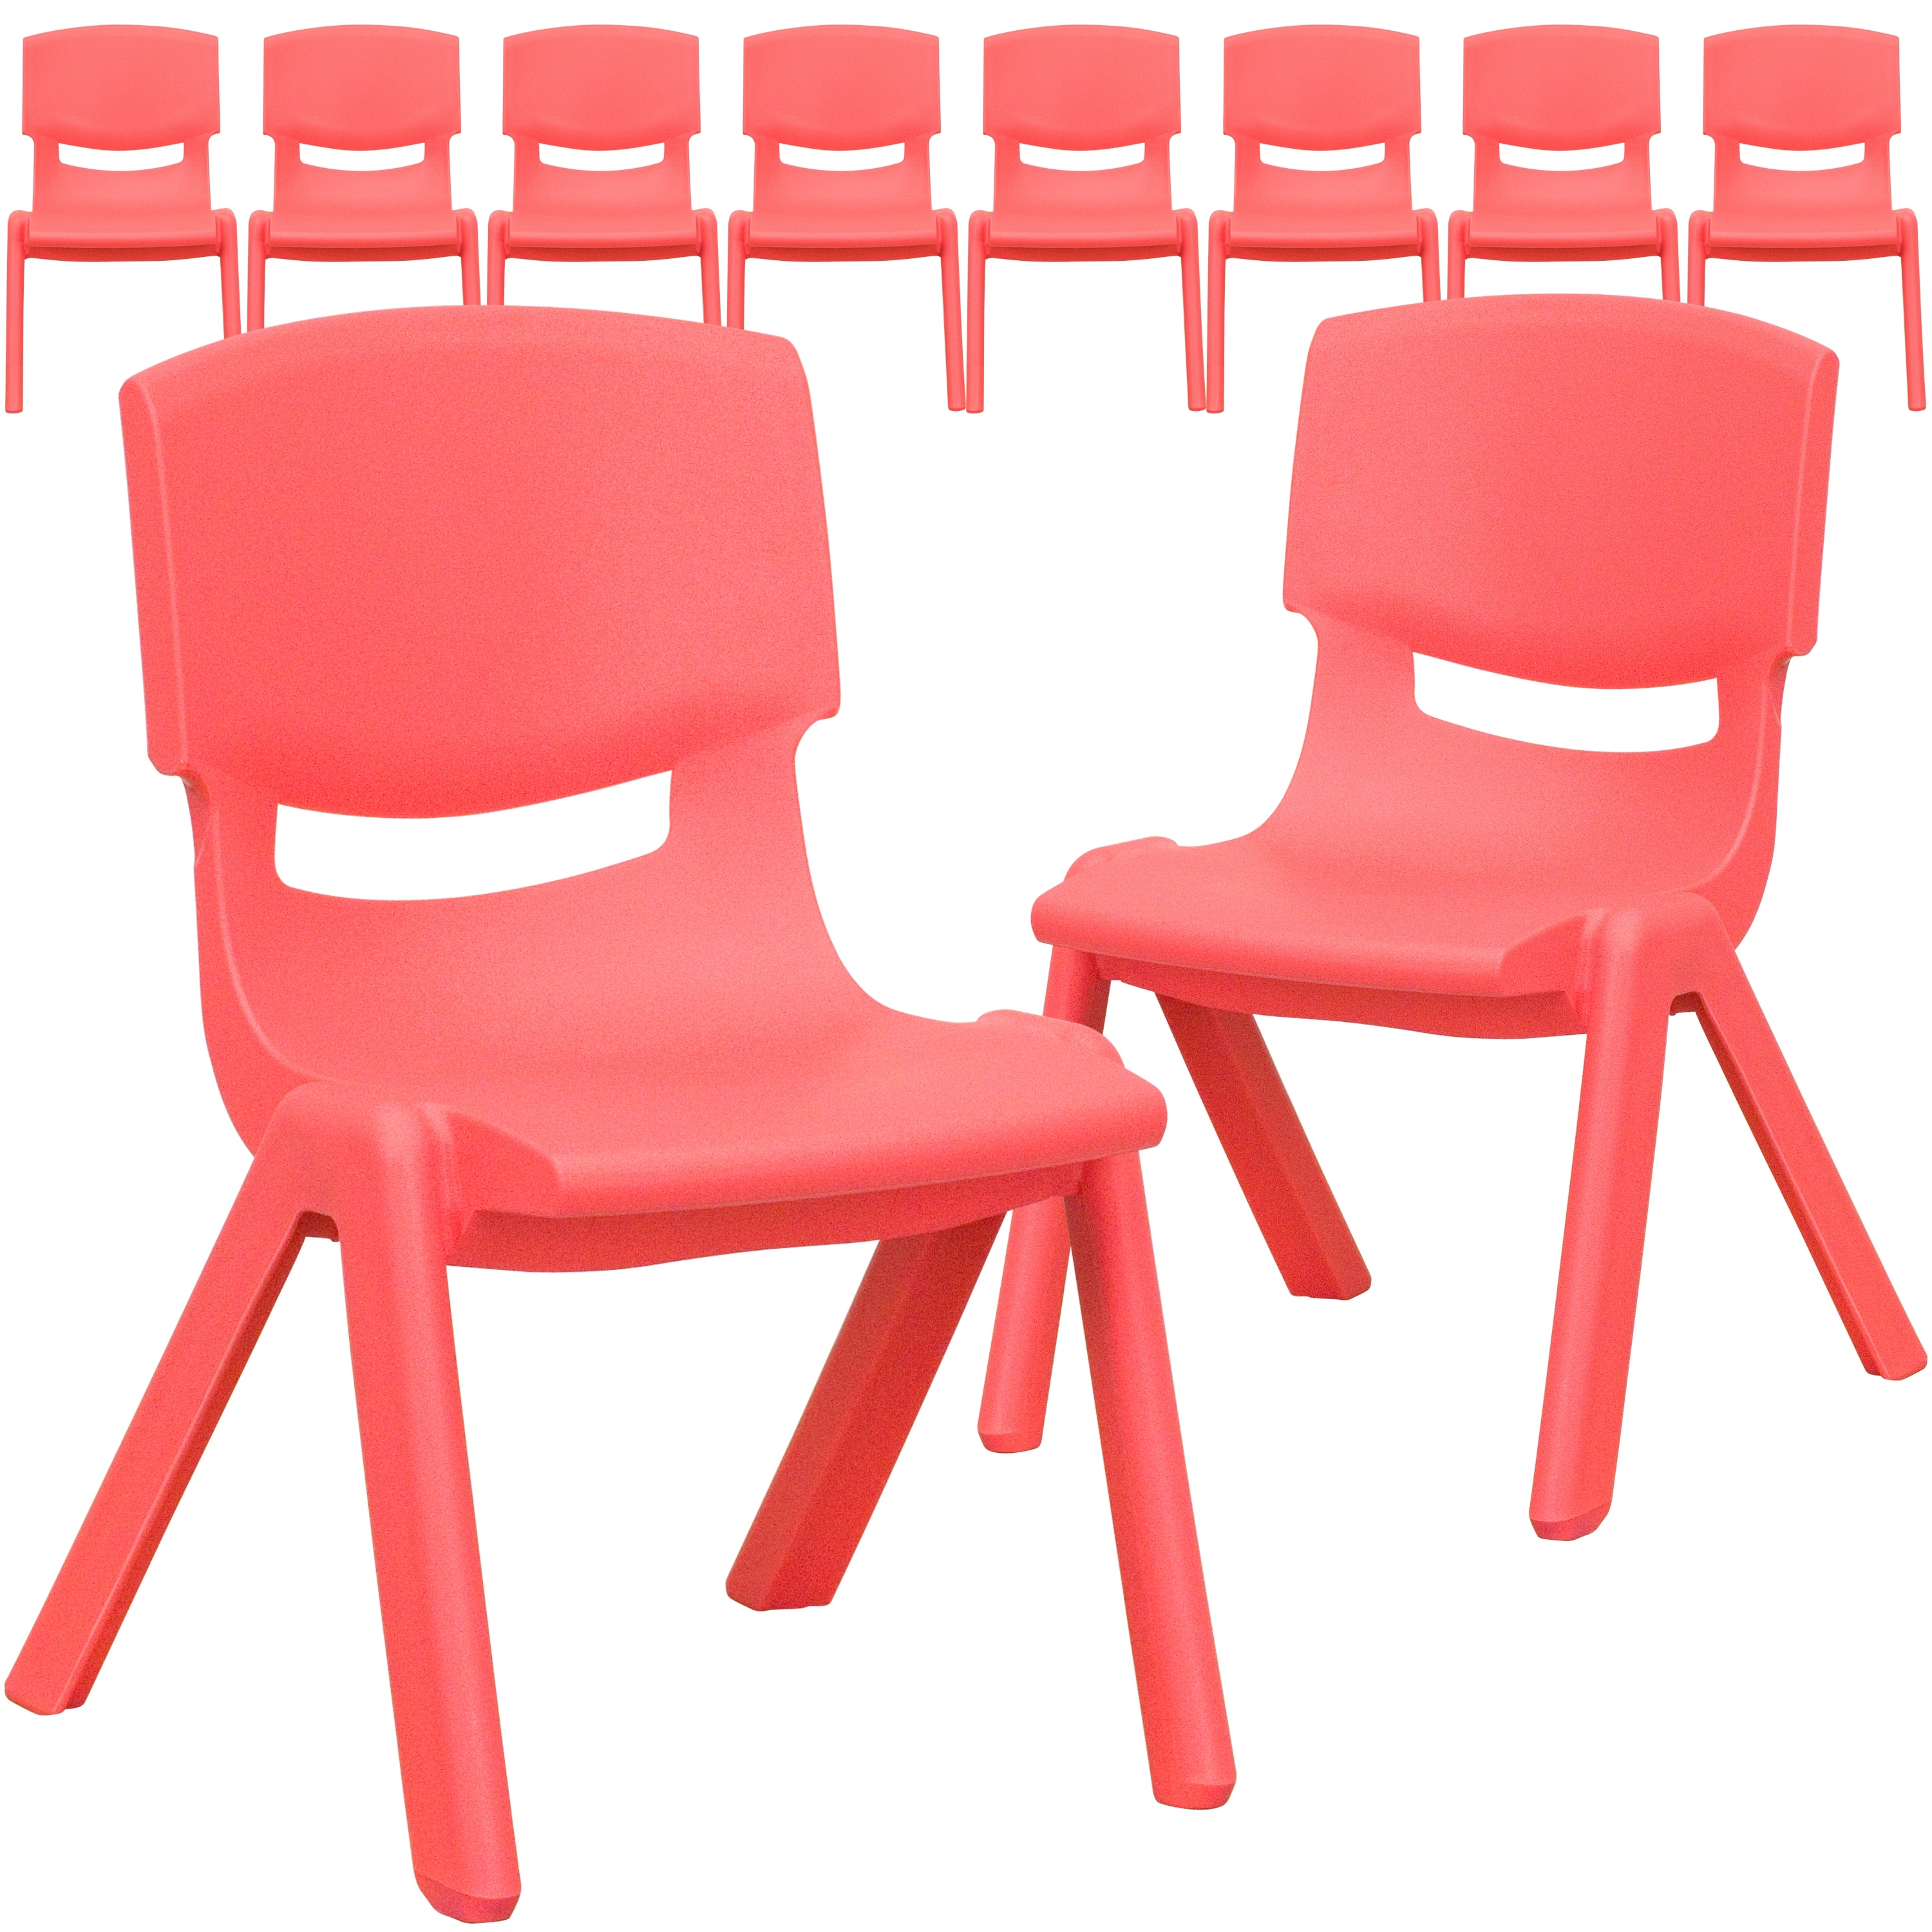 preschool stacking chairs